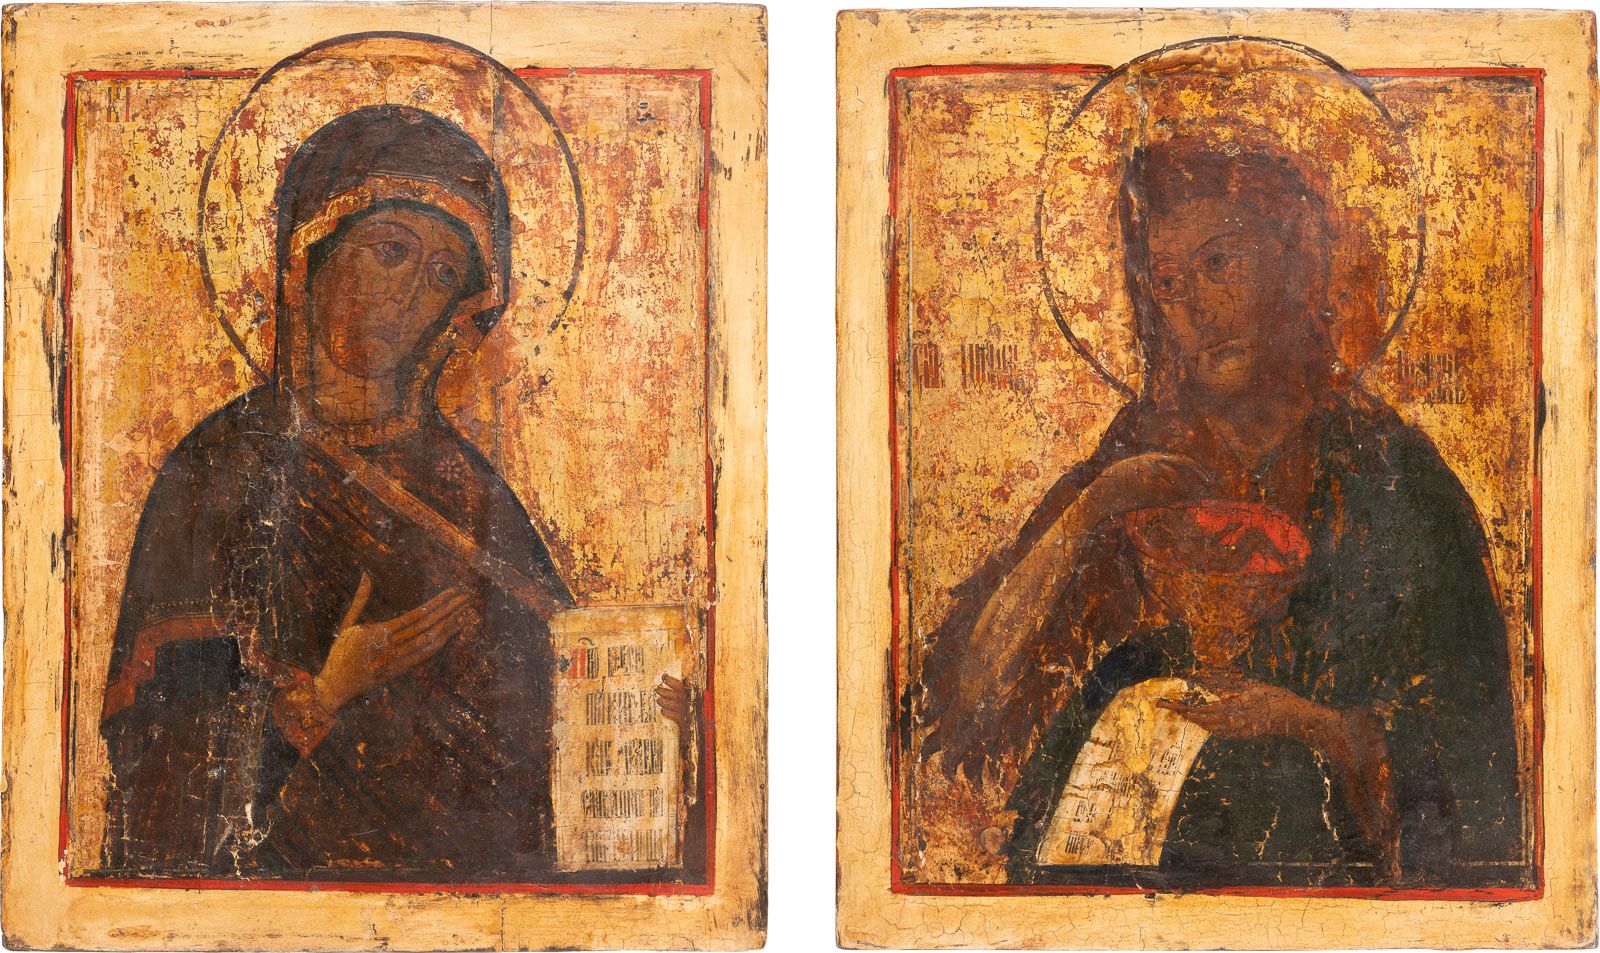 TWO LARGE ICONS SHOWING THE MOTHER OF GOD AND ST. JOHN THE DOS GRANDES ICONOS QU&hellip;